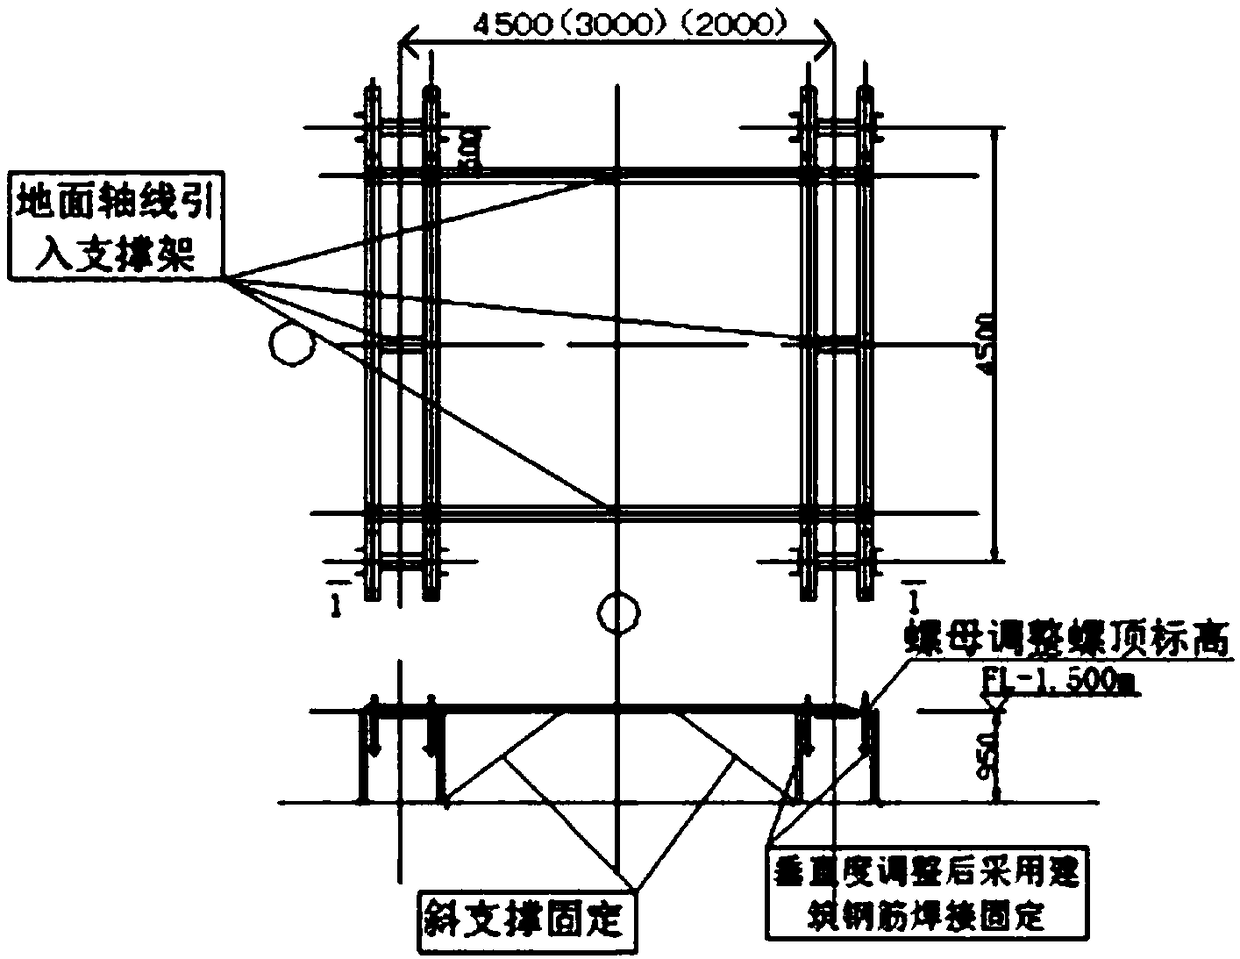 Construction technology of extra-large steel structure canopy under severe conditions